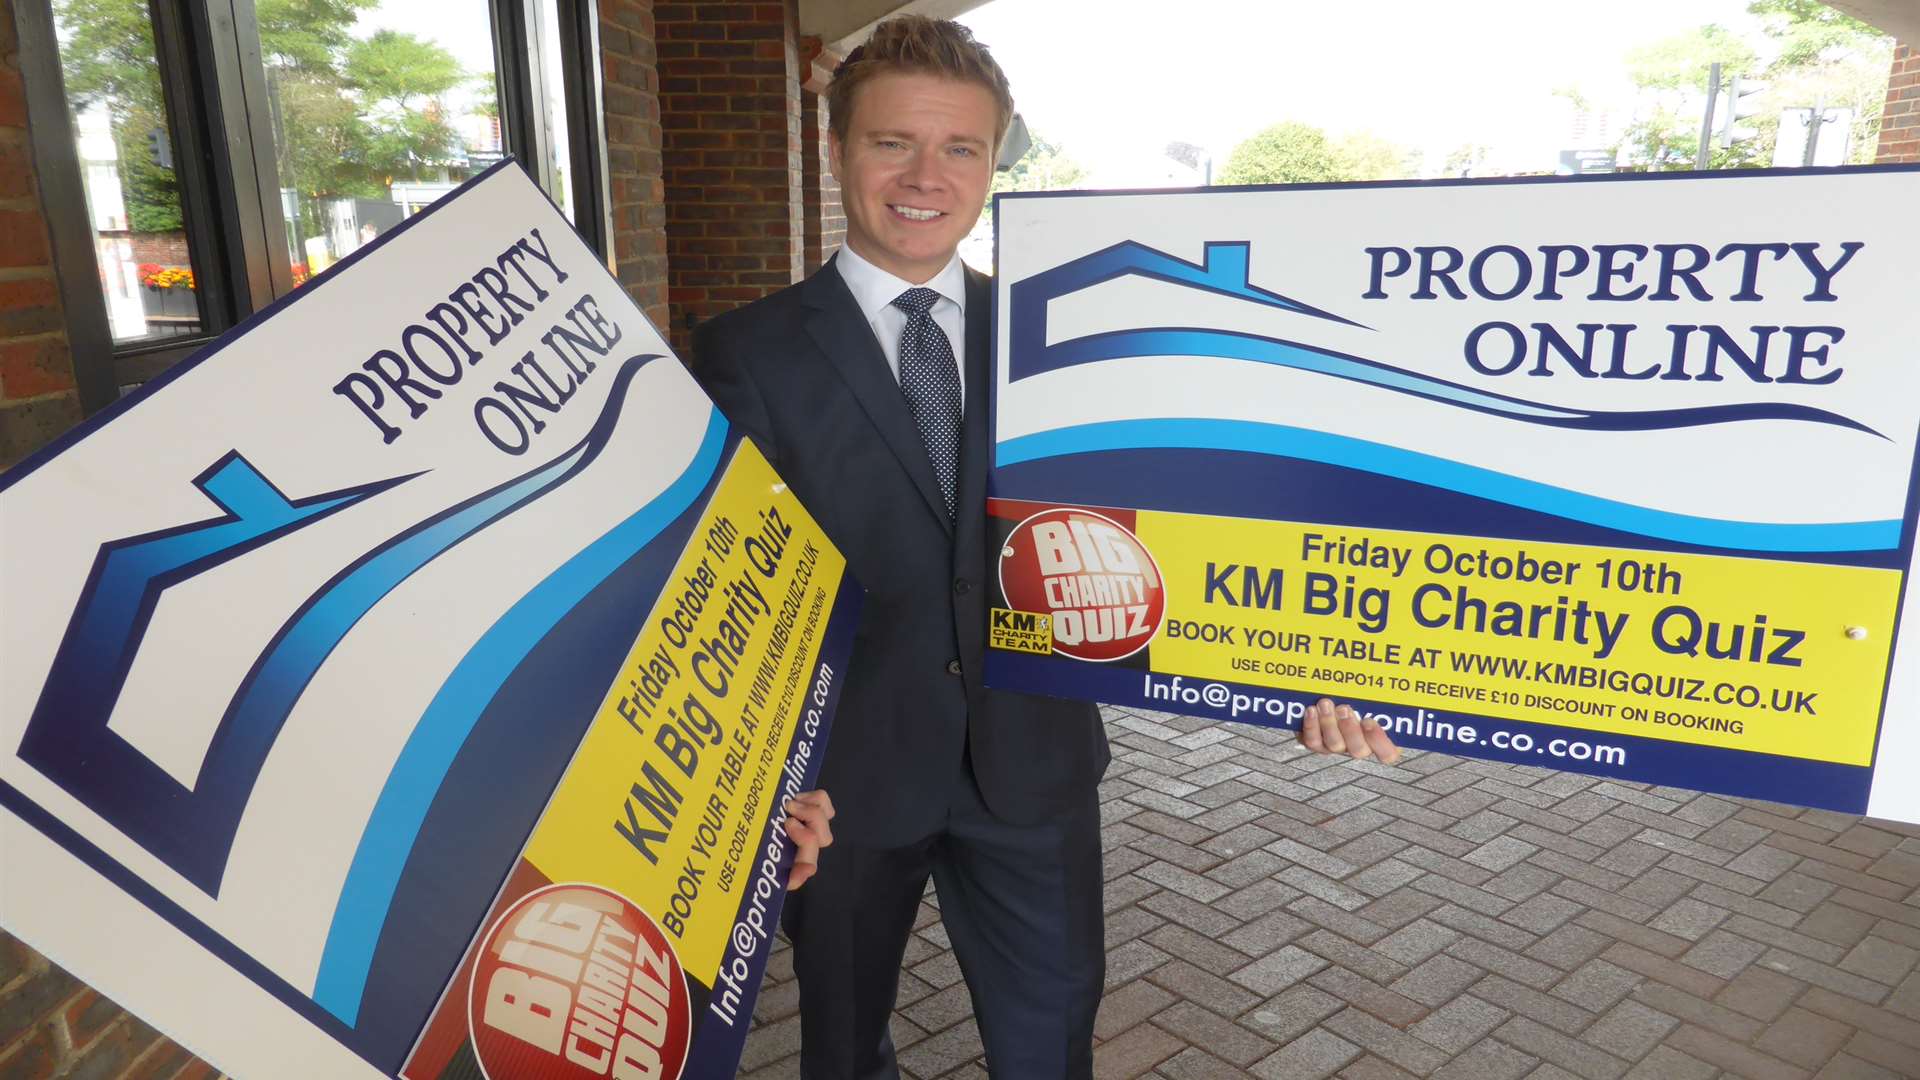 Gareth Harmer, director of Property Online estate agents, is supporting the KM's Big Charity Quiz by featuring the event on 50 boards in the Ashford area